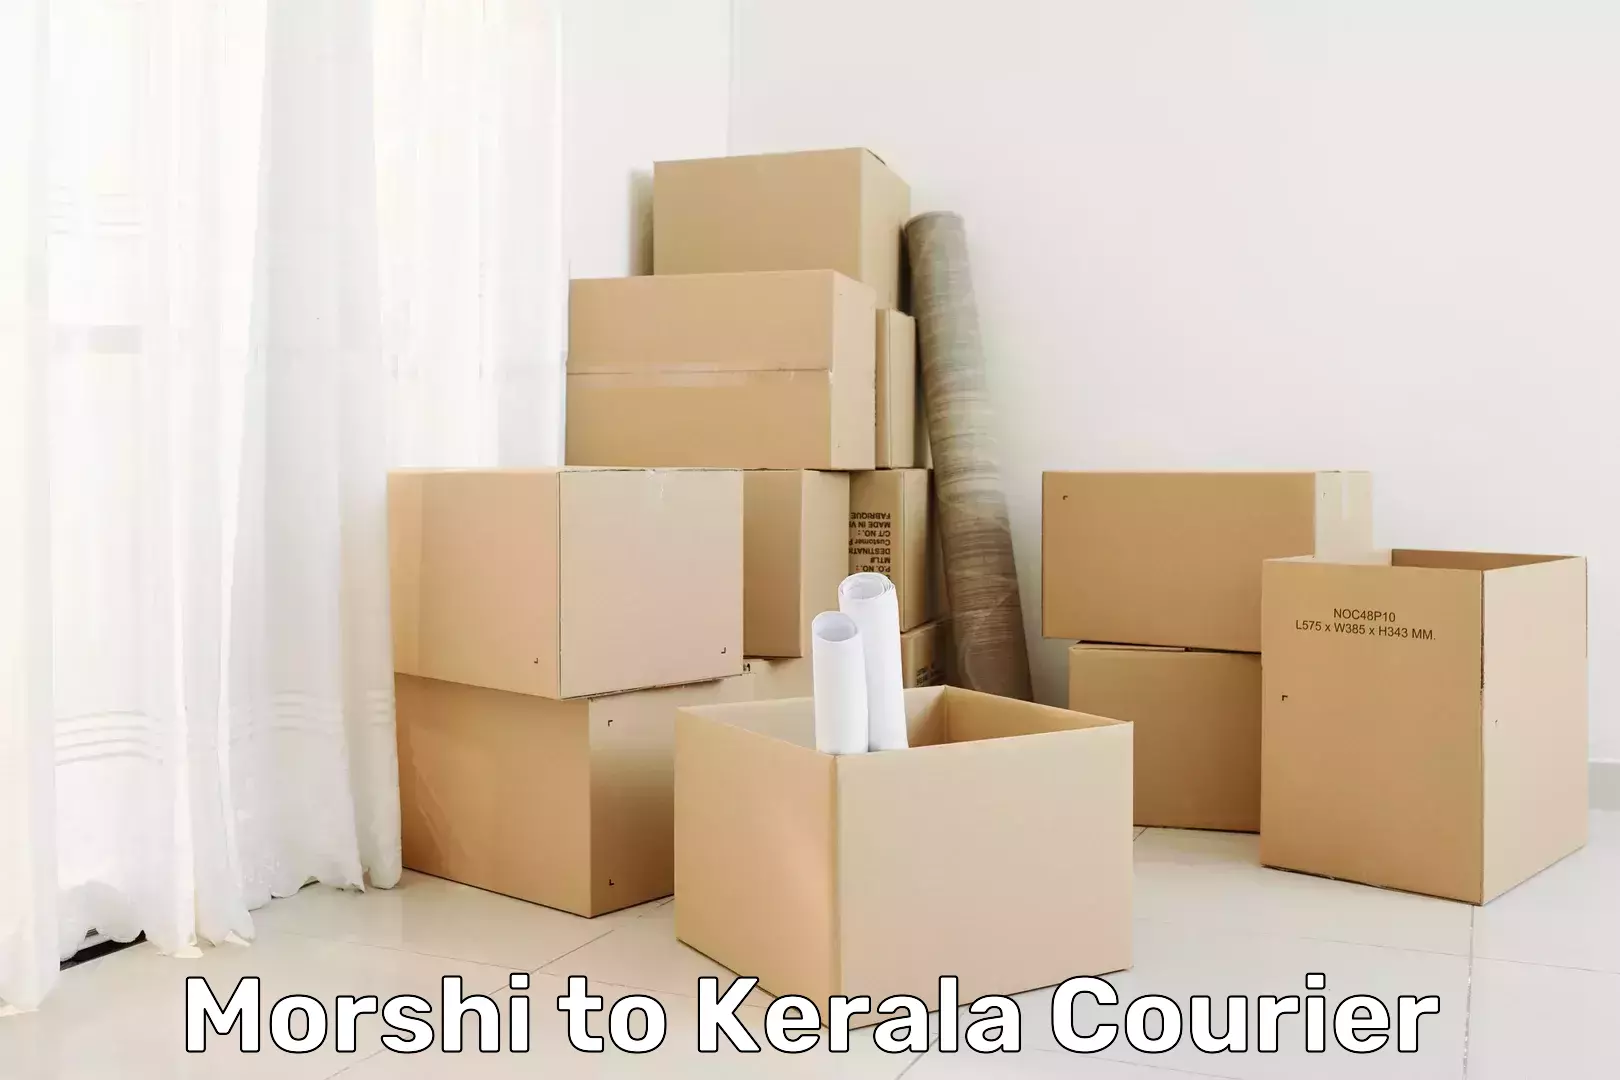 Efficient package consolidation in Morshi to Kerala